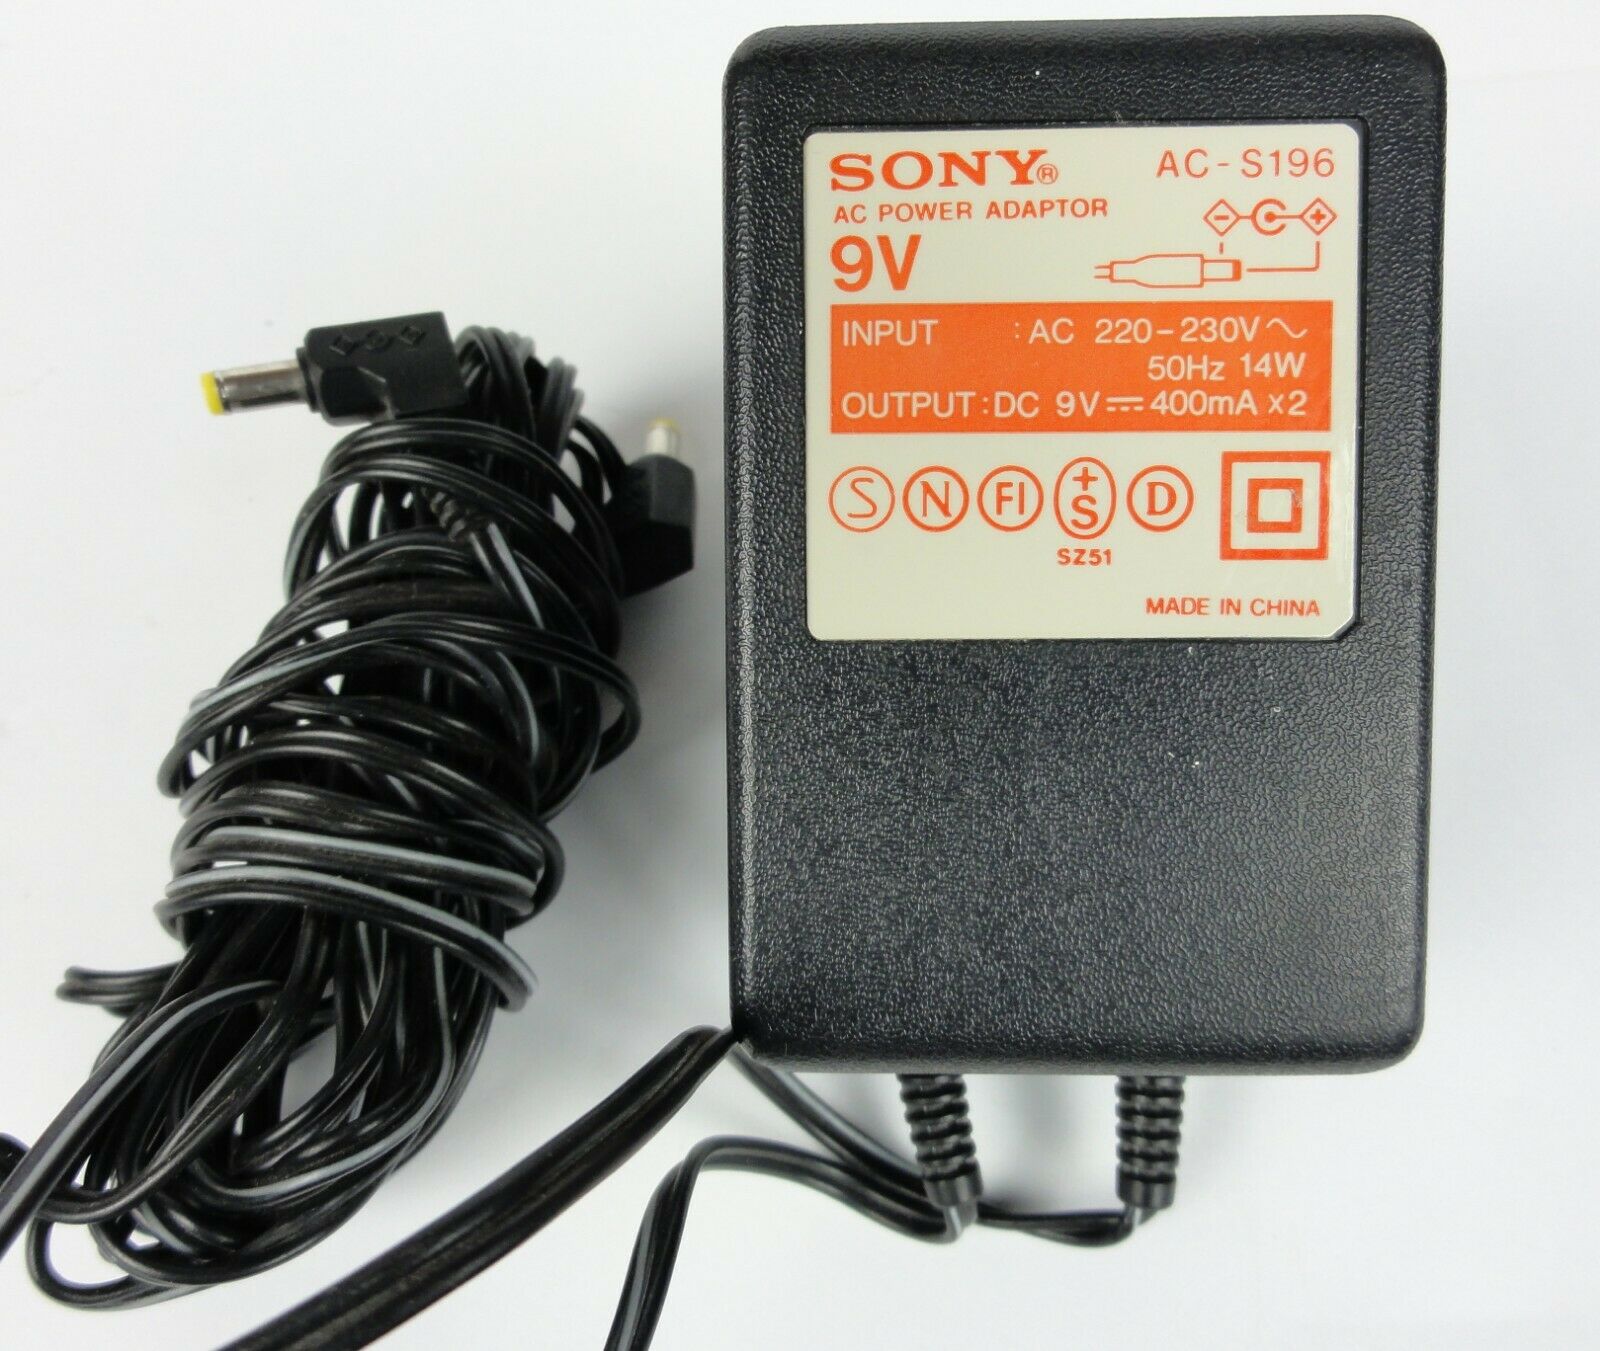 Genuine Sony AC-96ND AC Power Adaptor Charger (9V/600mA) Colour: Black Connector A: Sony Jack Unit Quantity: 1 Connec